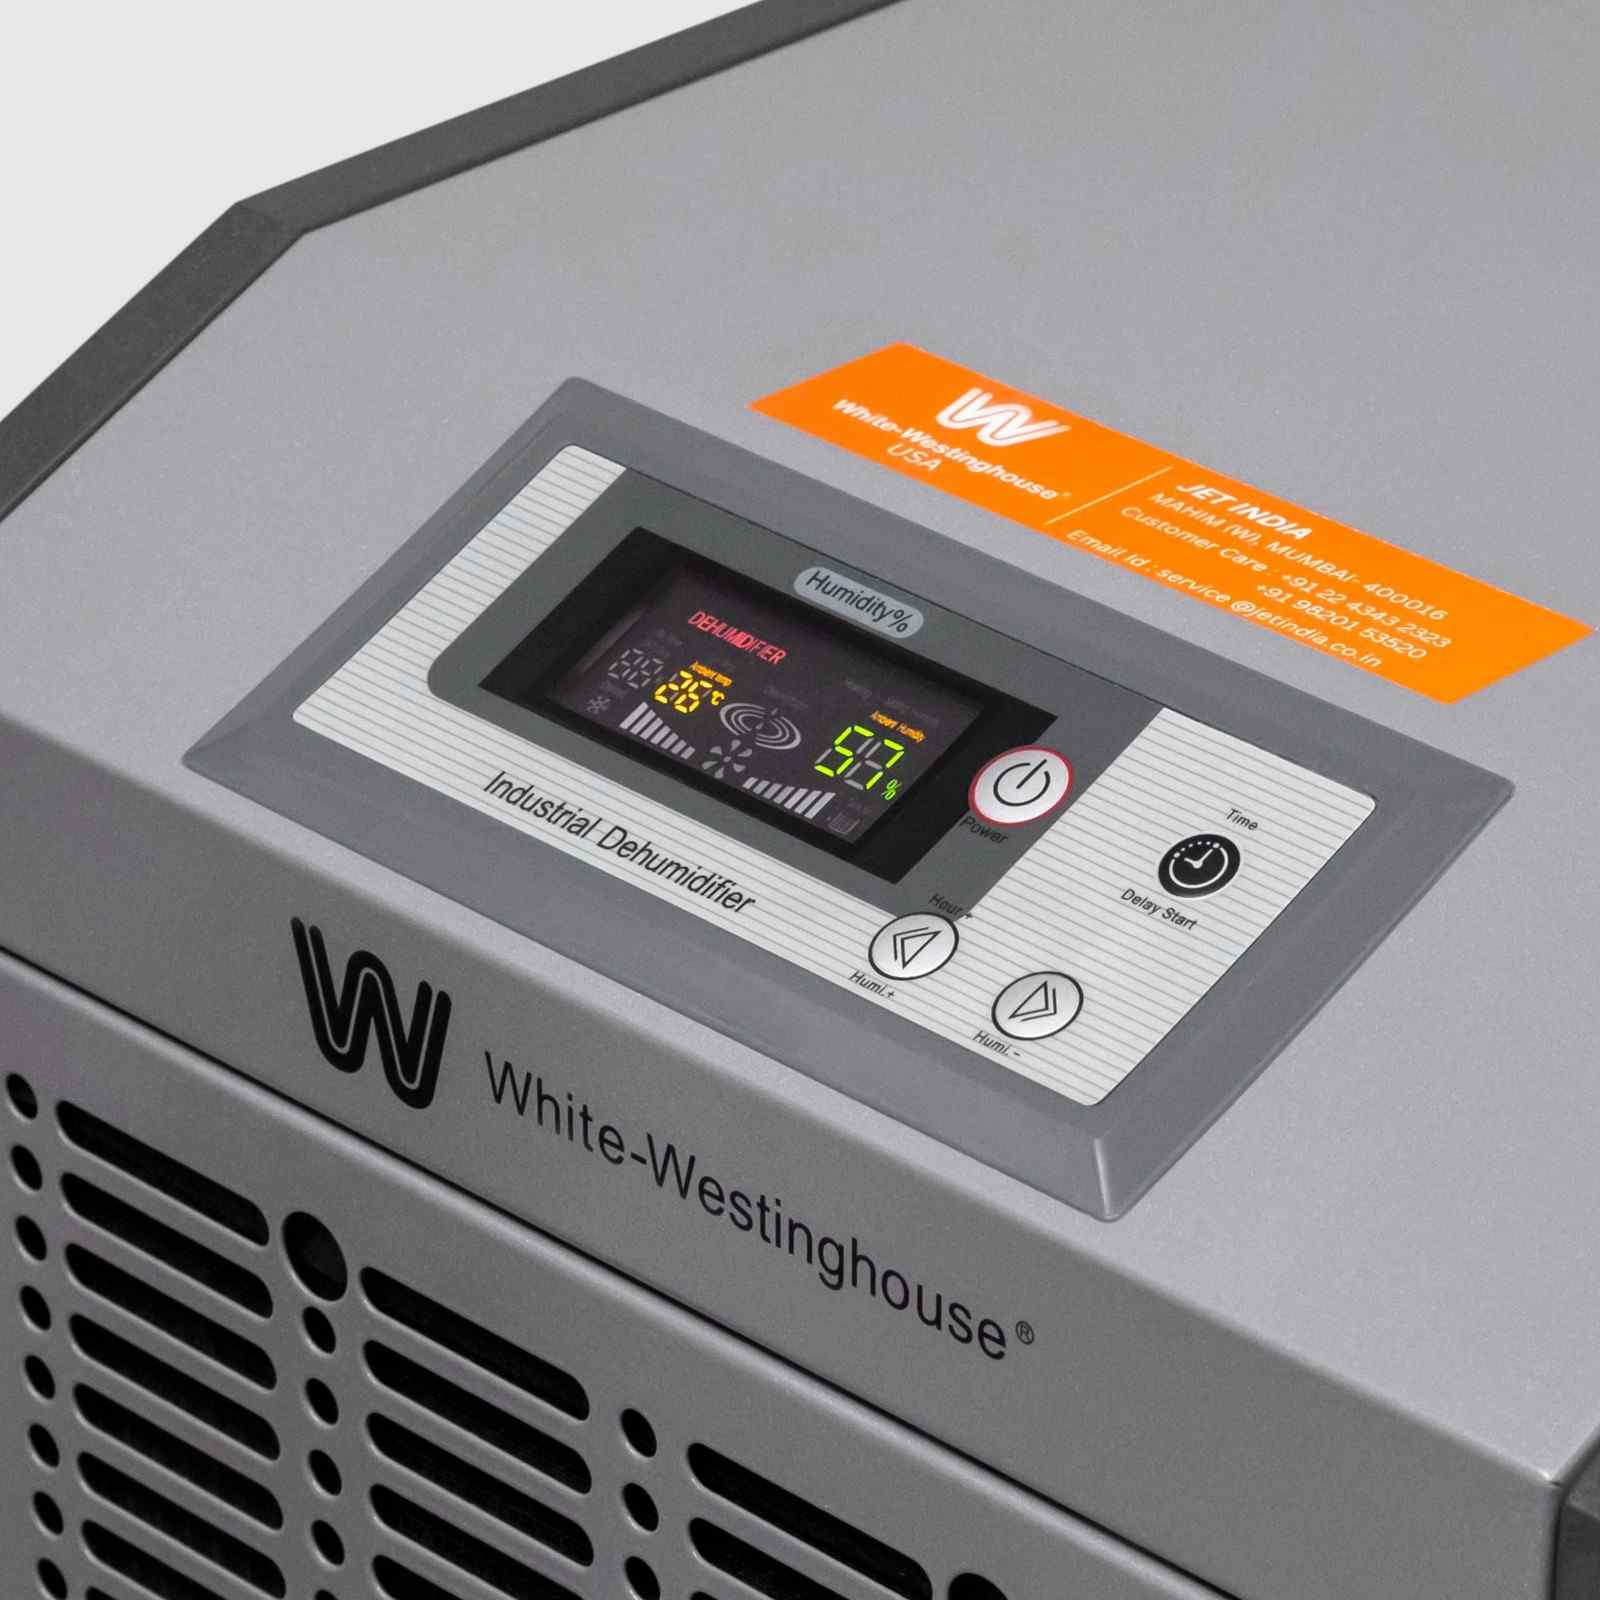 White Westinghouse Dehumidifier Industrial Refrigerant - 60 Liters [ Covers 6000 Cubic ft ]